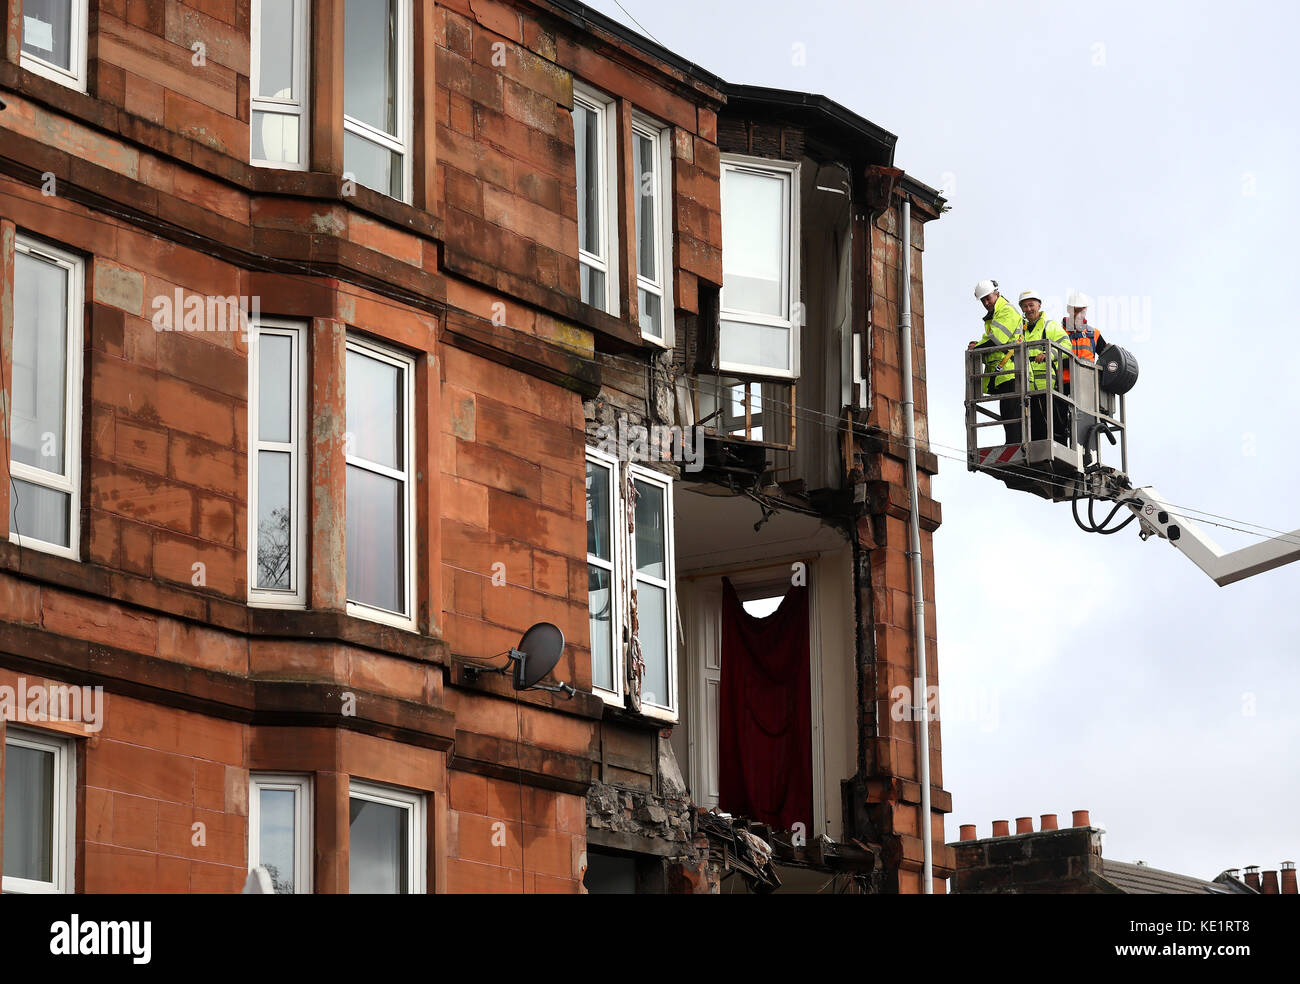 Workmen survey the damage to a block of flats in Crosshill, in the south side of Glasgow, after part of the front was brought down in high winds as Storm Ophelia sweeps across Scotland. Stock Photo